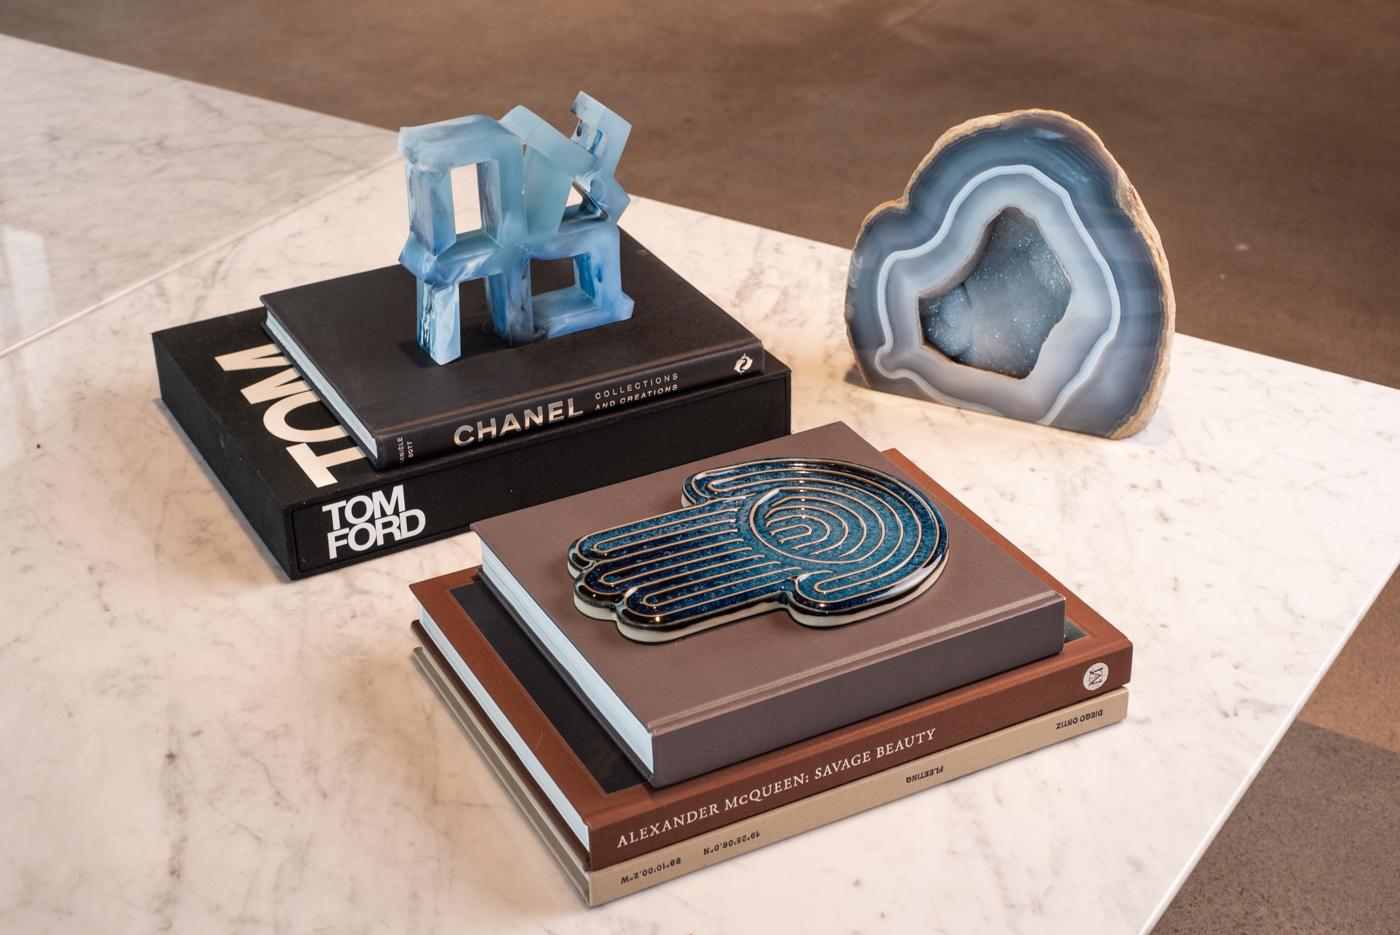 bruci's hand poured resin sculpture with an Ahava ( אהבה -love in the Hebrew language) motif is a beautiful and timeless decoration piece for any home. Given the nature of the piece being hand poured, each sculpture produced is unique and one of a